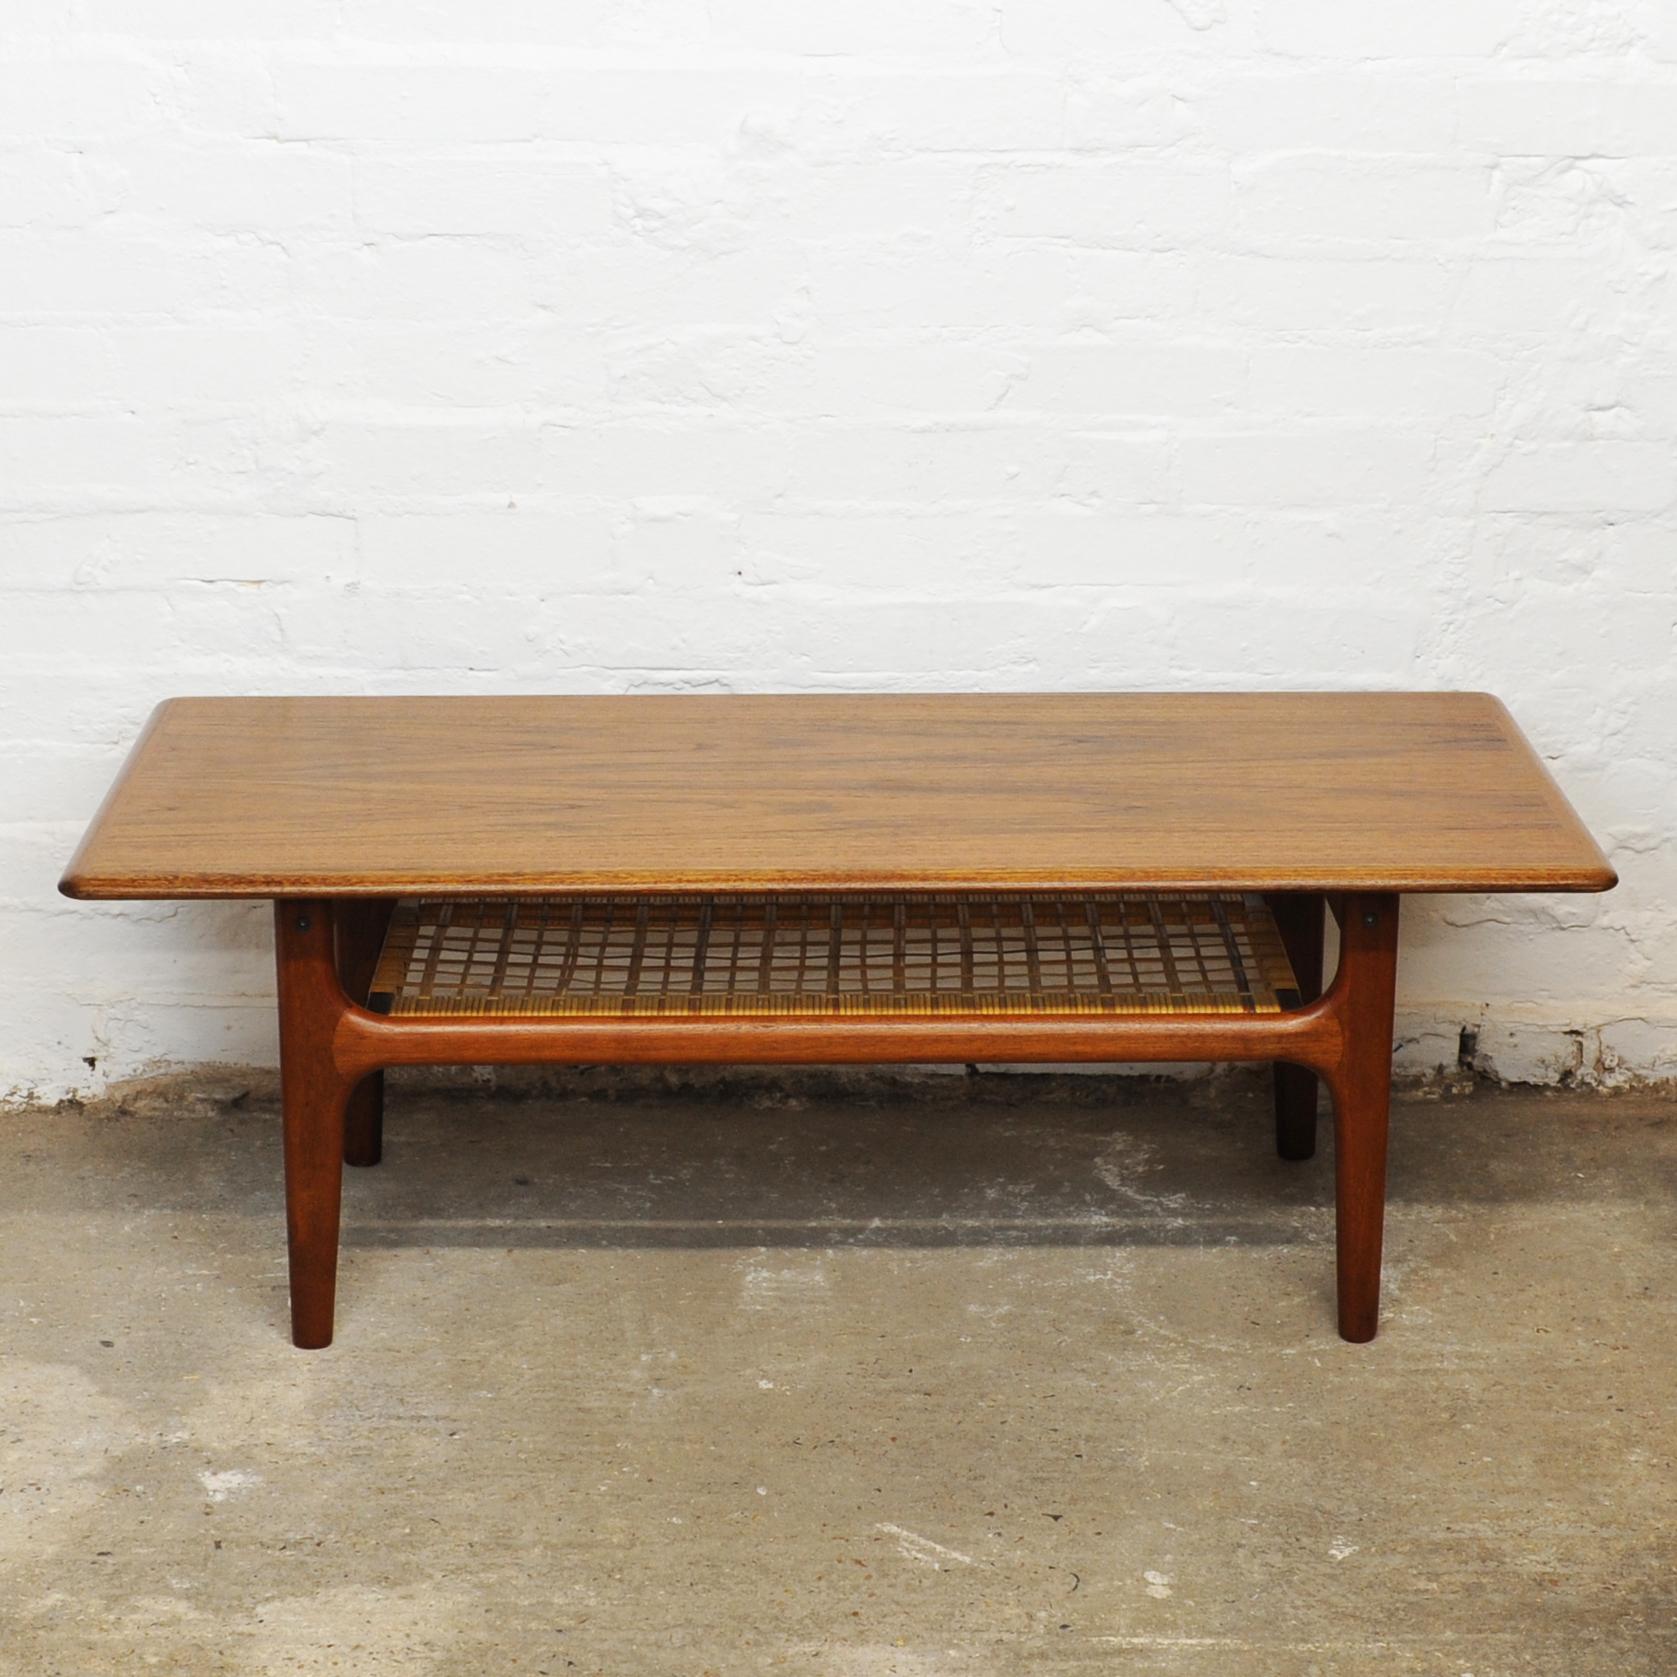 A 1960s teak and cane Danish coffee table by Trioh Mobler.

Manufacturer - Trioh Mobler

Design Period - 1960 to 1969

Country of Manufacture - Denmark

Style - Mid-Century

Detailed Condition - Good with minimal defects.

Restoration and Damage